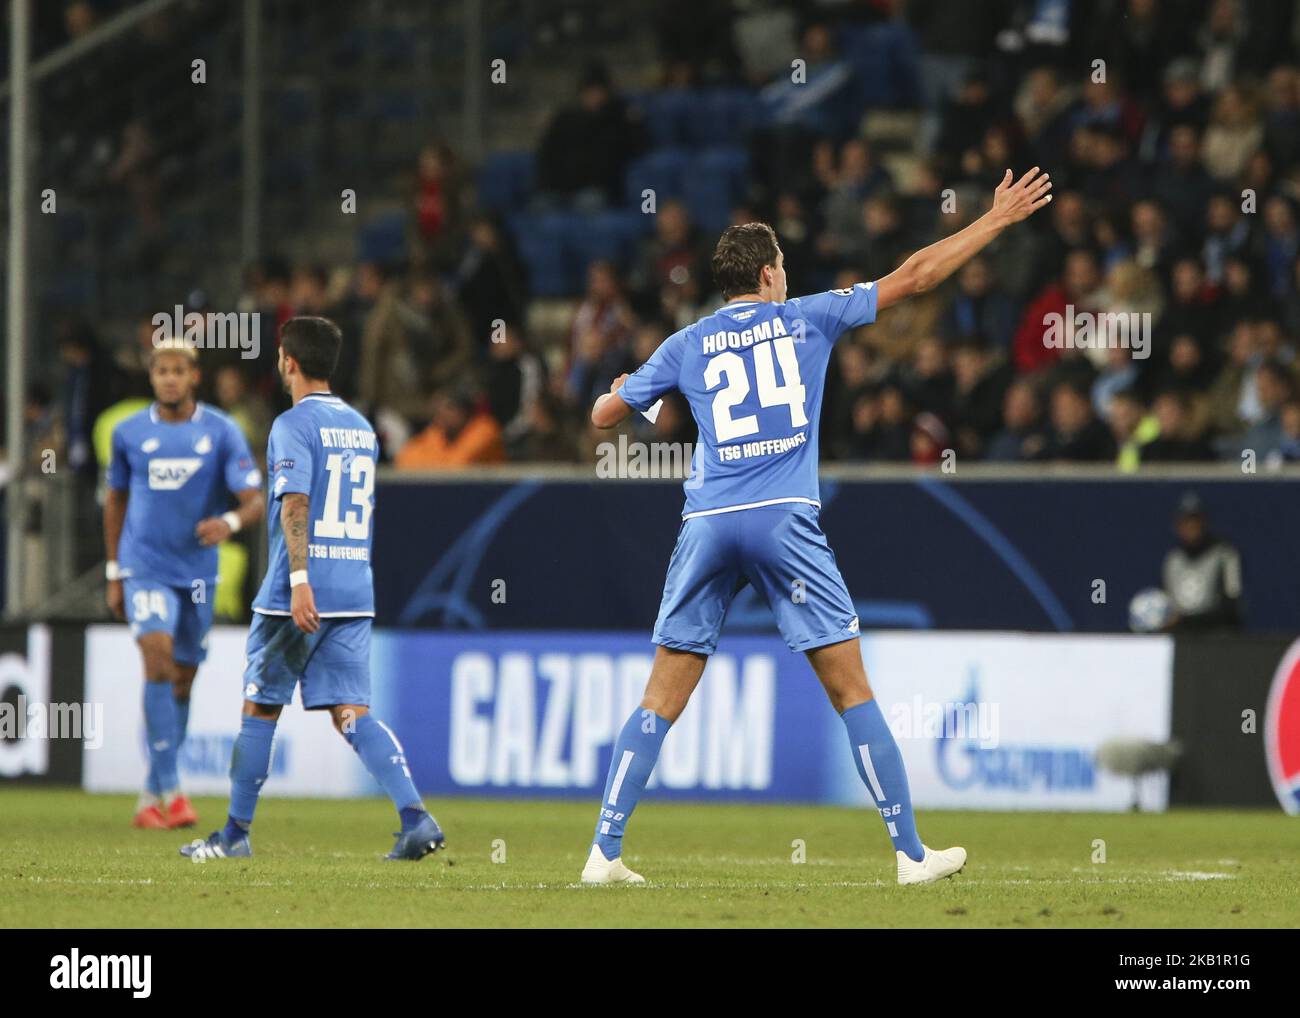 Justin Hoogma, during the UEFA Champions League group F football match between TSG 1899 Hoffenheim and Manchester City at the Rhein-Neckar-Arena in Sinsheim, southwestern Germany, on October 2, 2018. (Photo by Elyxandro Cegarra/NurPhoto) Stock Photo